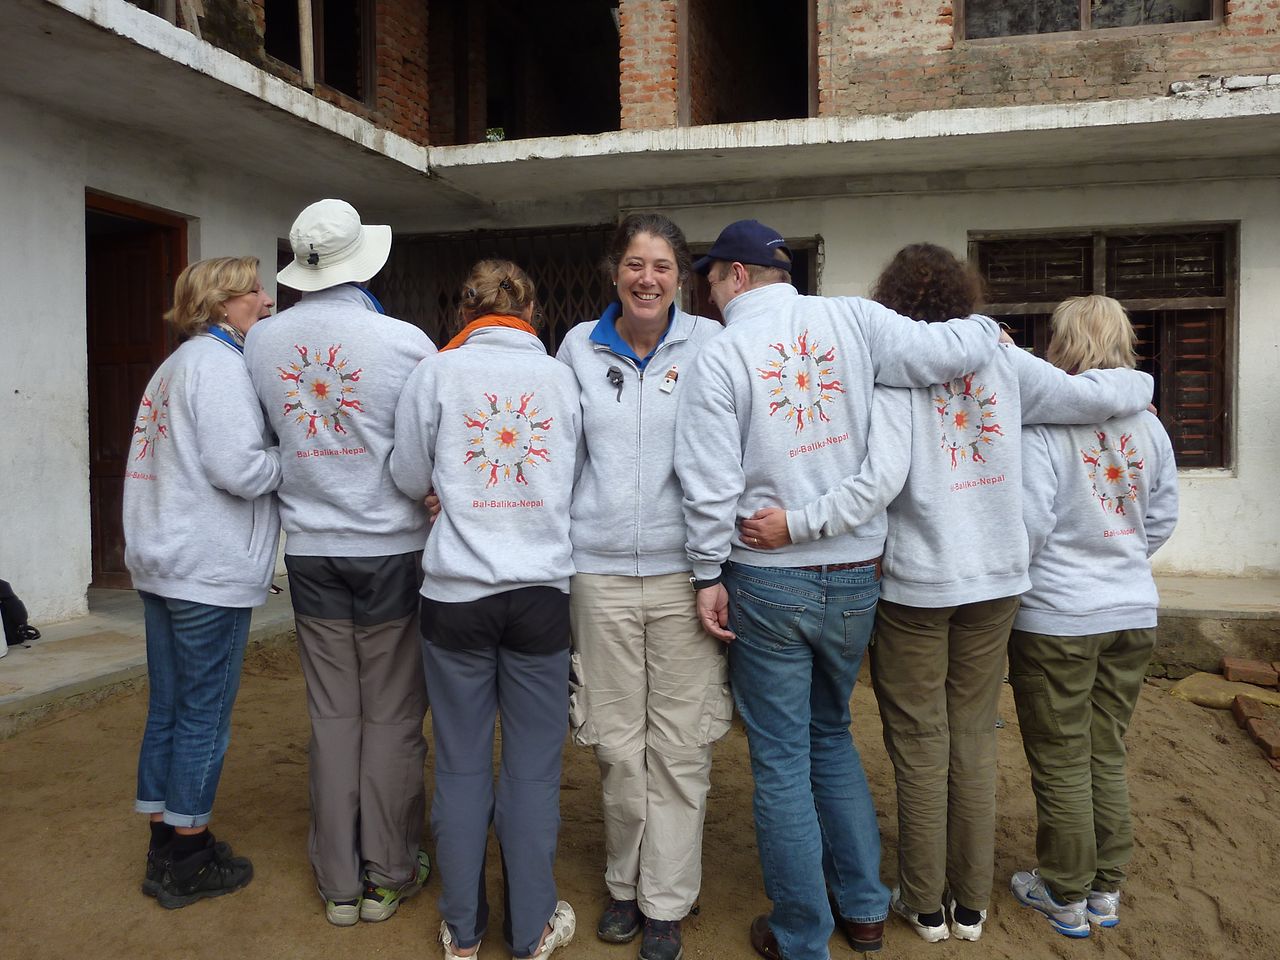 In the 17 years since her first aid mission in Nepal, the team has grown steadily larger